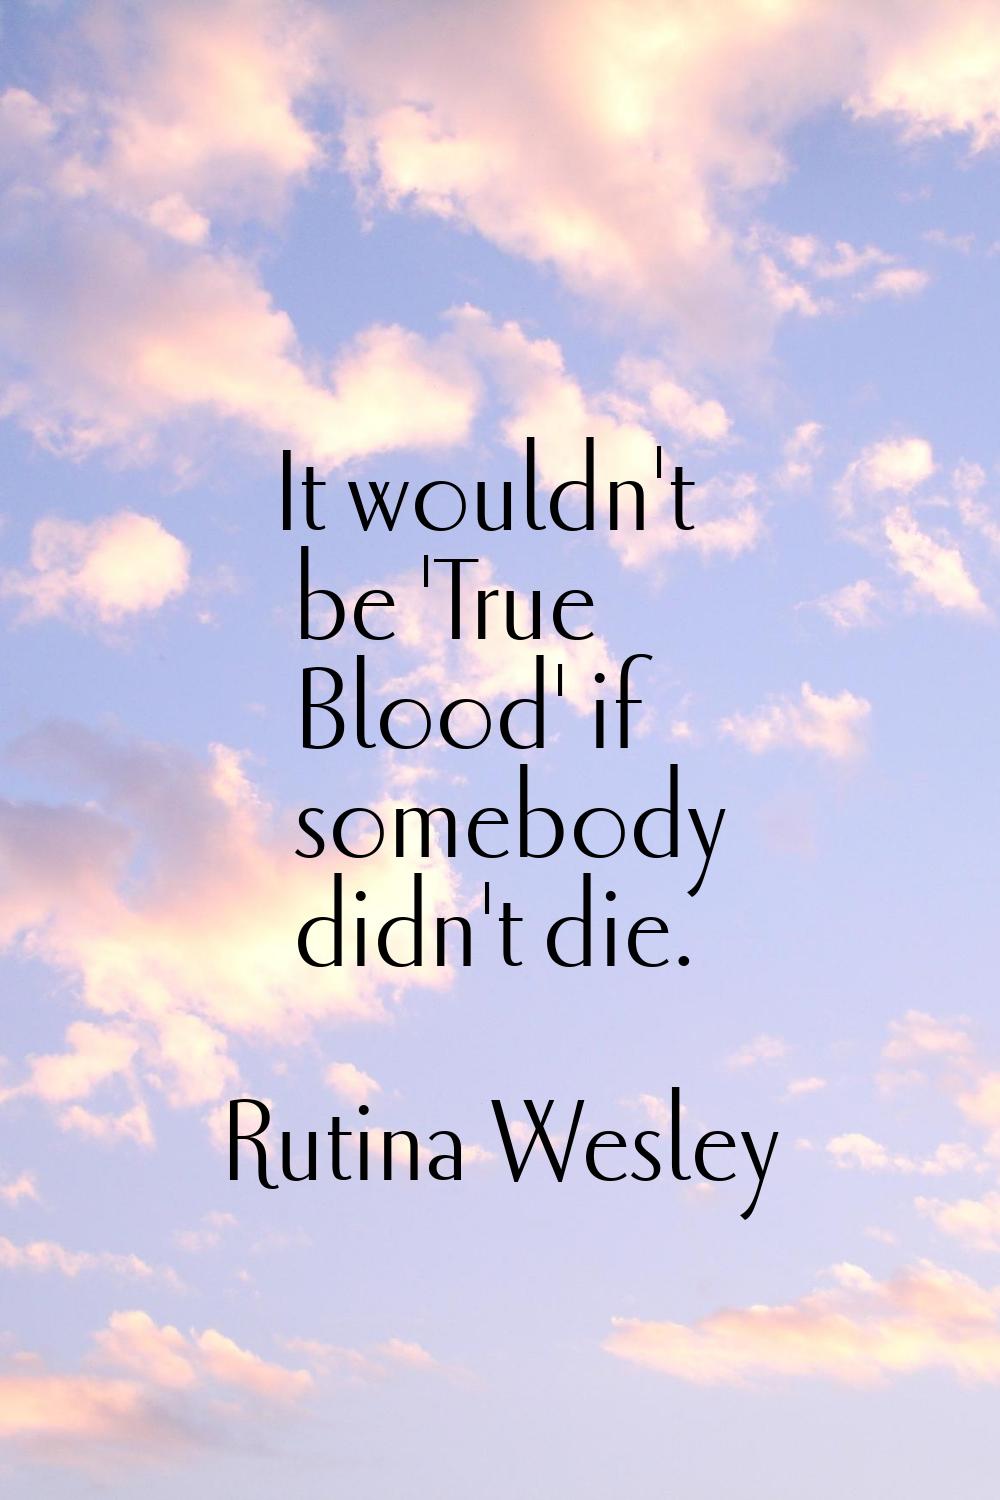 It wouldn't be 'True Blood' if somebody didn't die.